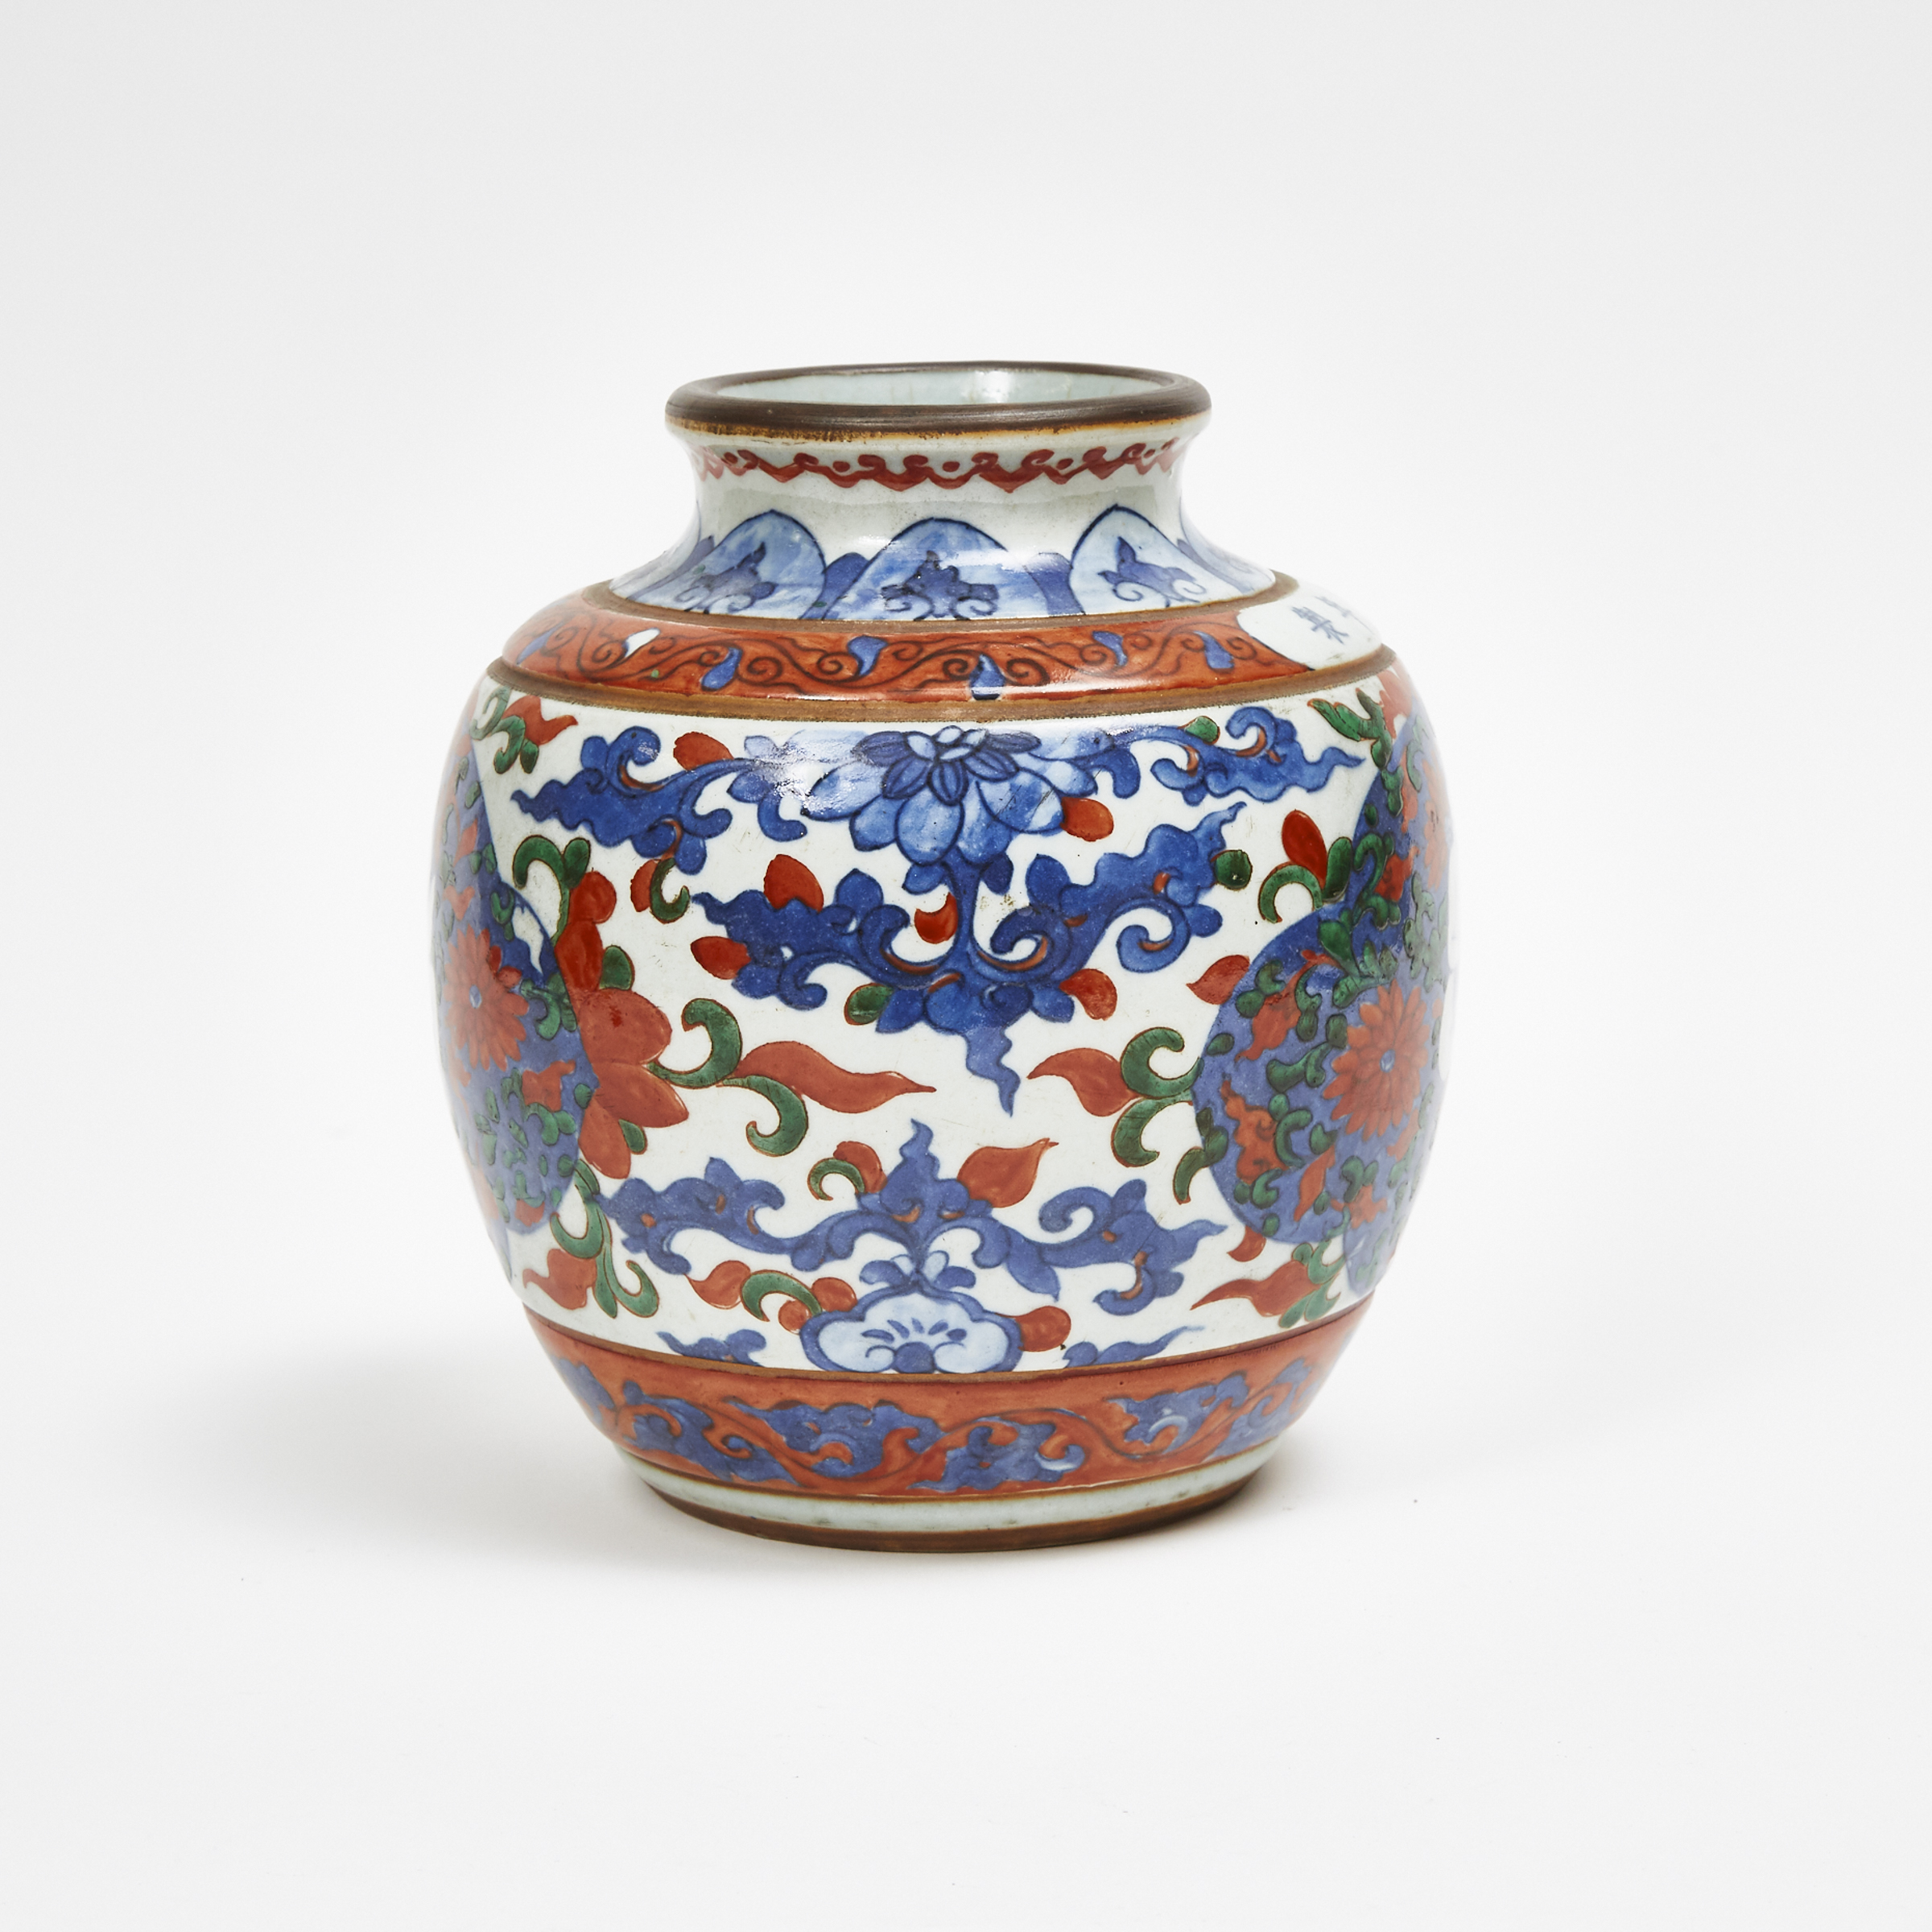 A Blue and White with Enamel Porcelain 'Boys' Vase, Qing Dynasty 